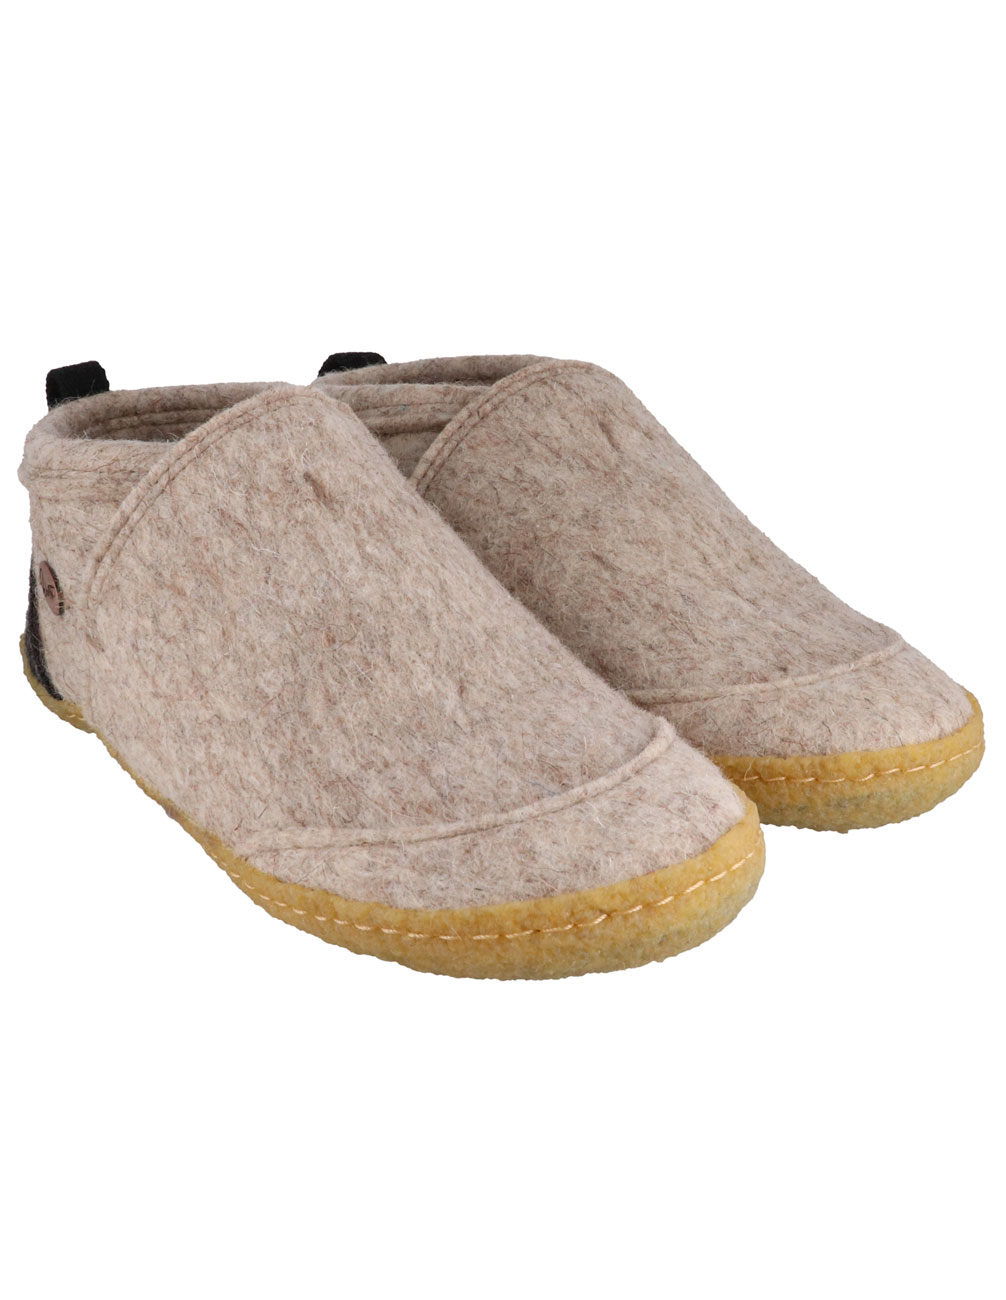 WoolFit Office Slippers Taiga with Rubber Sole, Beige